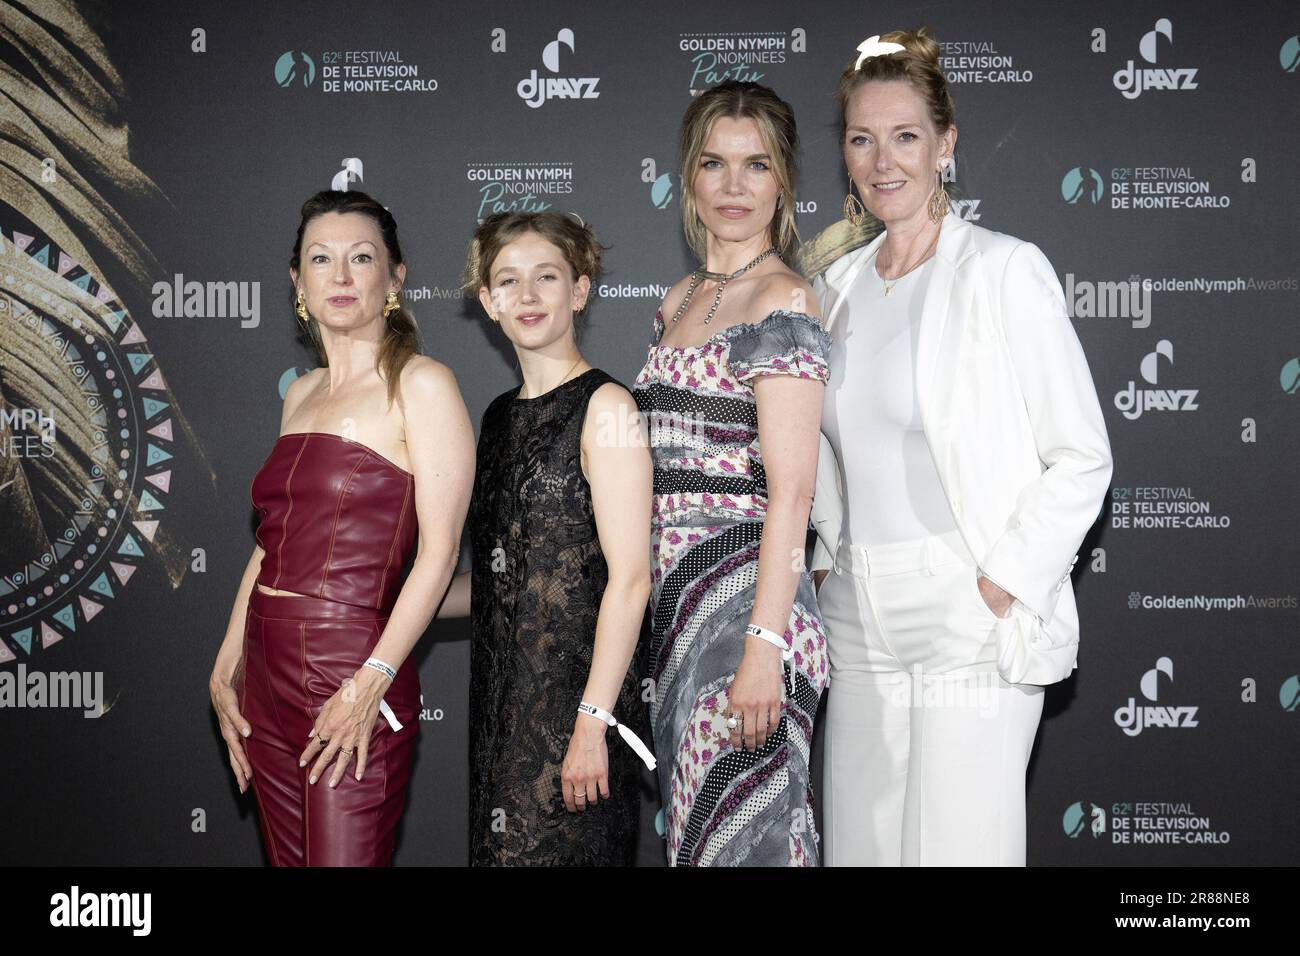 Monte Carlo, Monaco. 20th June, 2023. Louise Mieritz, Marie Reuther, Marie Bach Hansen, and Ditte Hansen attend the Nominees Party during the 62nd Monte Carlo TV Festival on June 19, 2023 in Monte-Carlo, Monaco. Photo by David Niviere/ABACAPRESS.COM Credit: Abaca Press/Alamy Live News Stock Photo